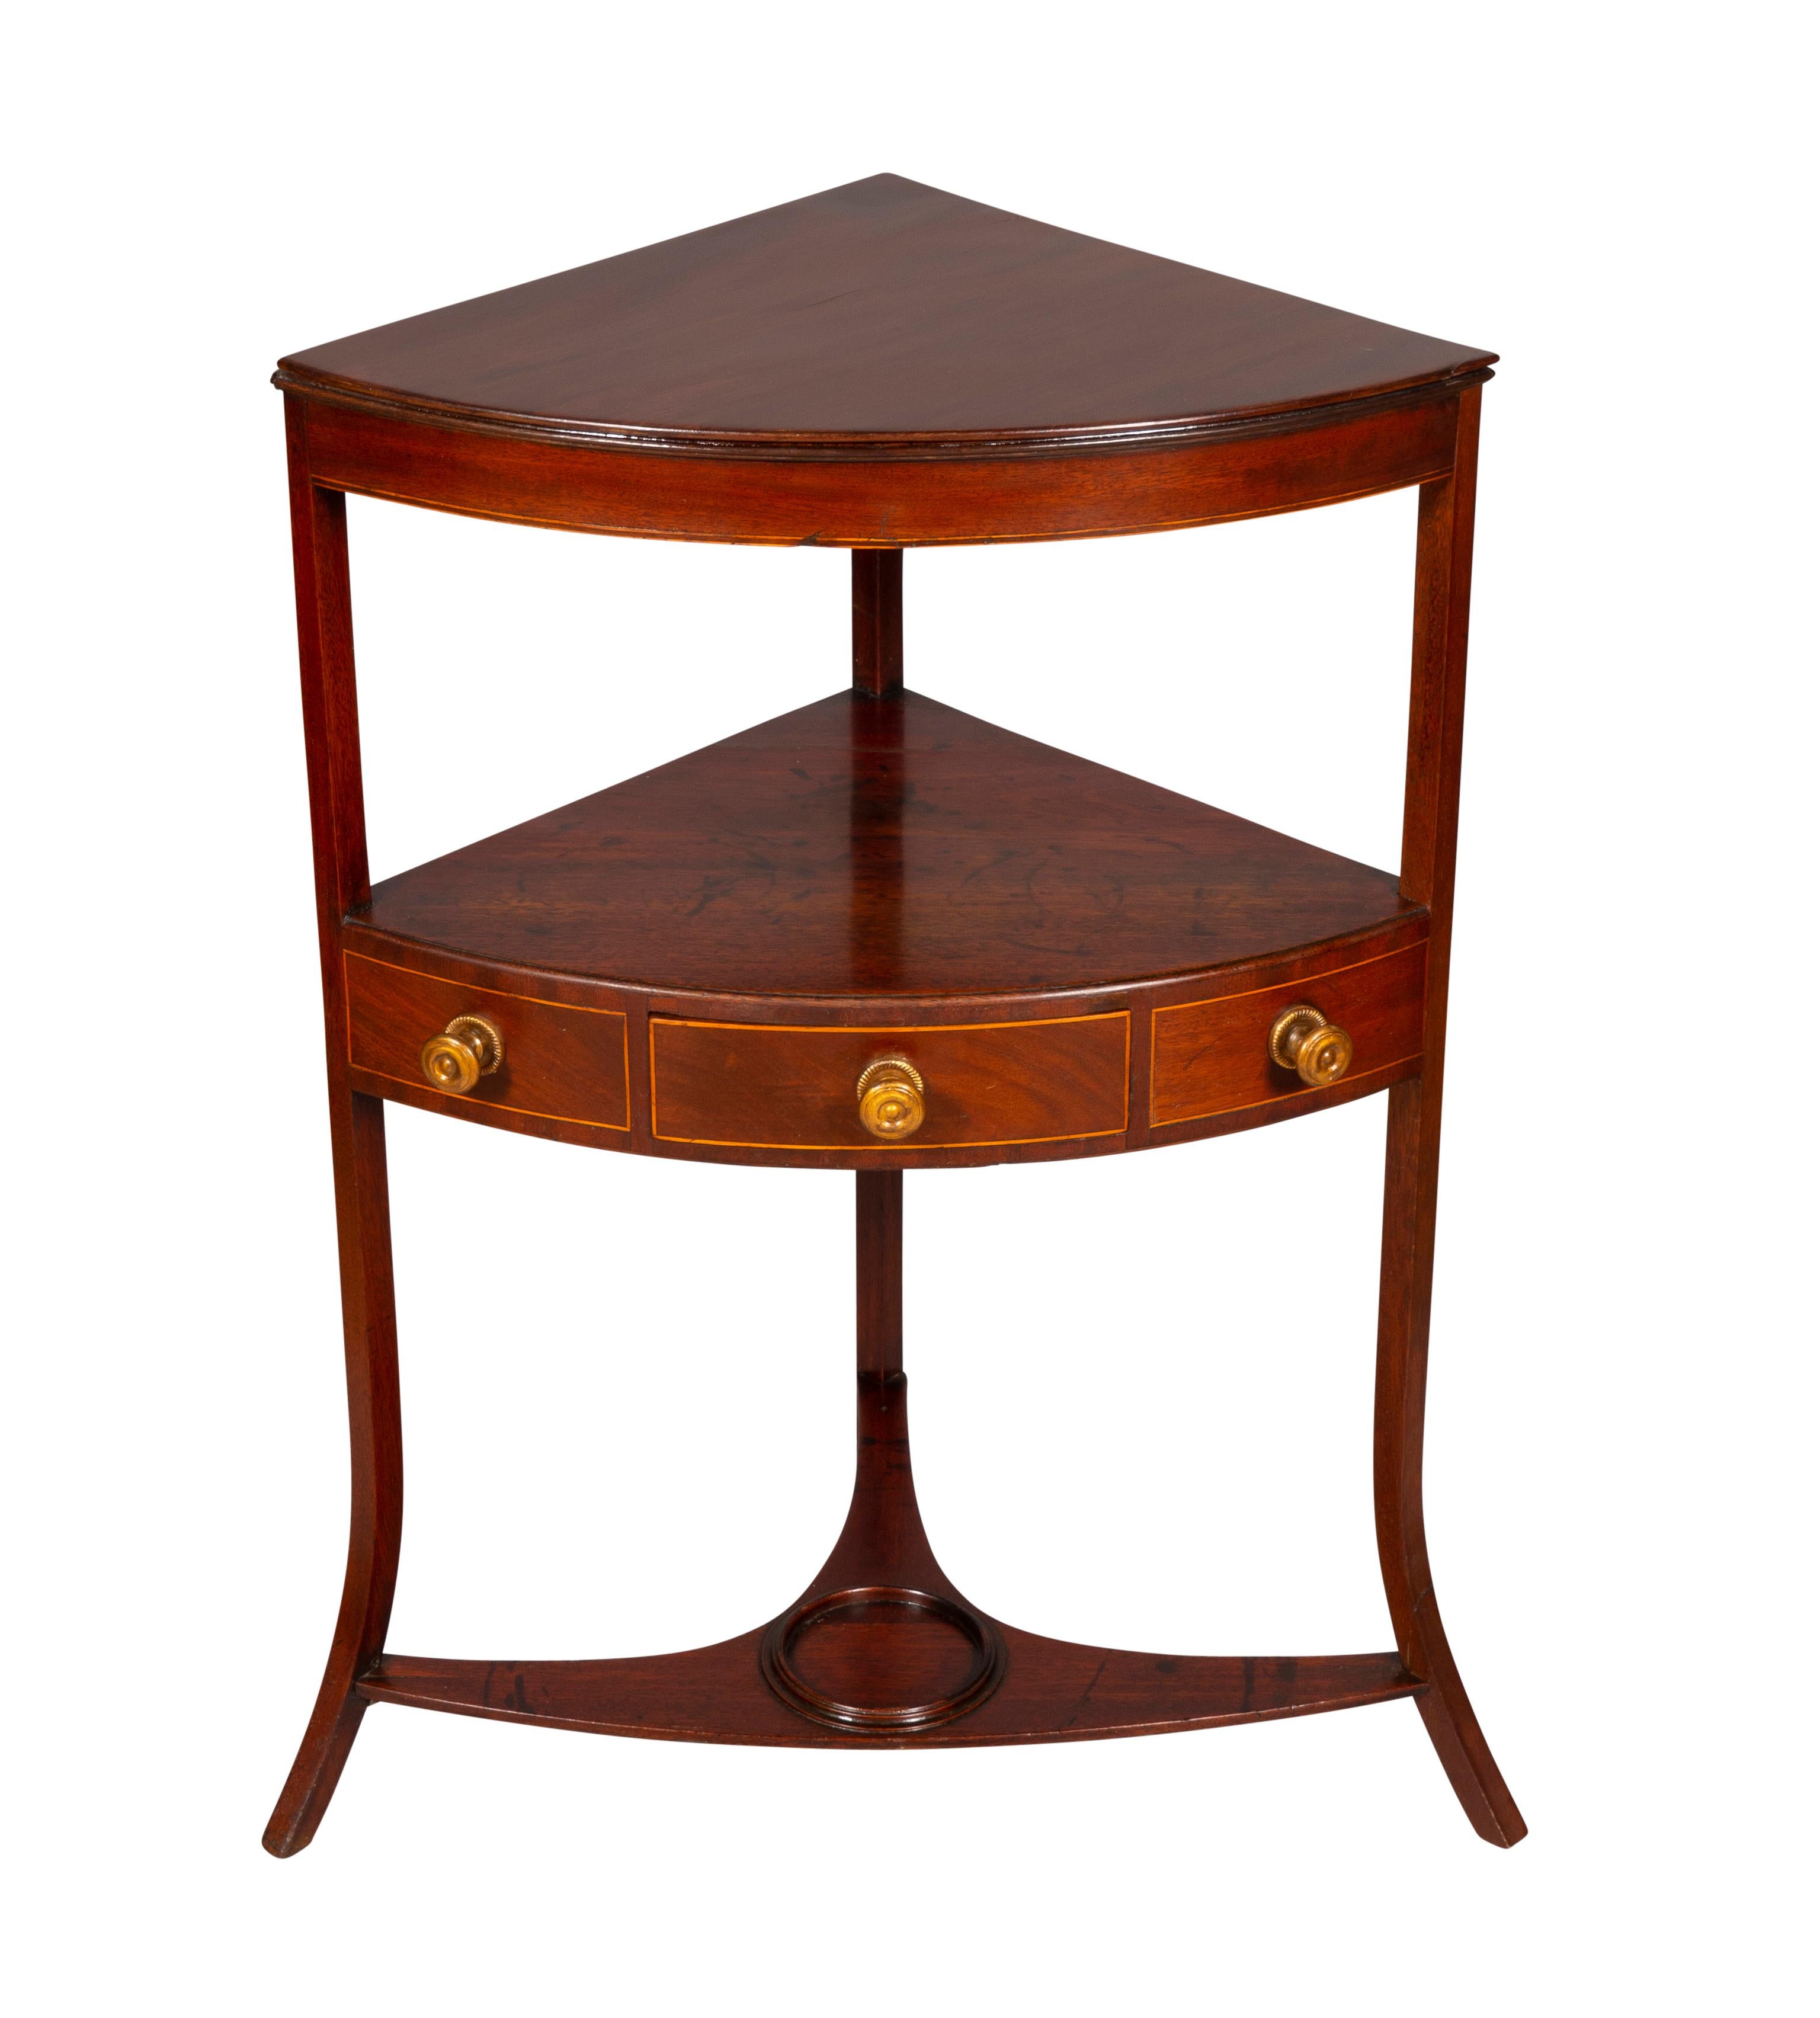 With mahogany top over a conforming lower shelf containing a drawer raised on out curved legs with stretcher.